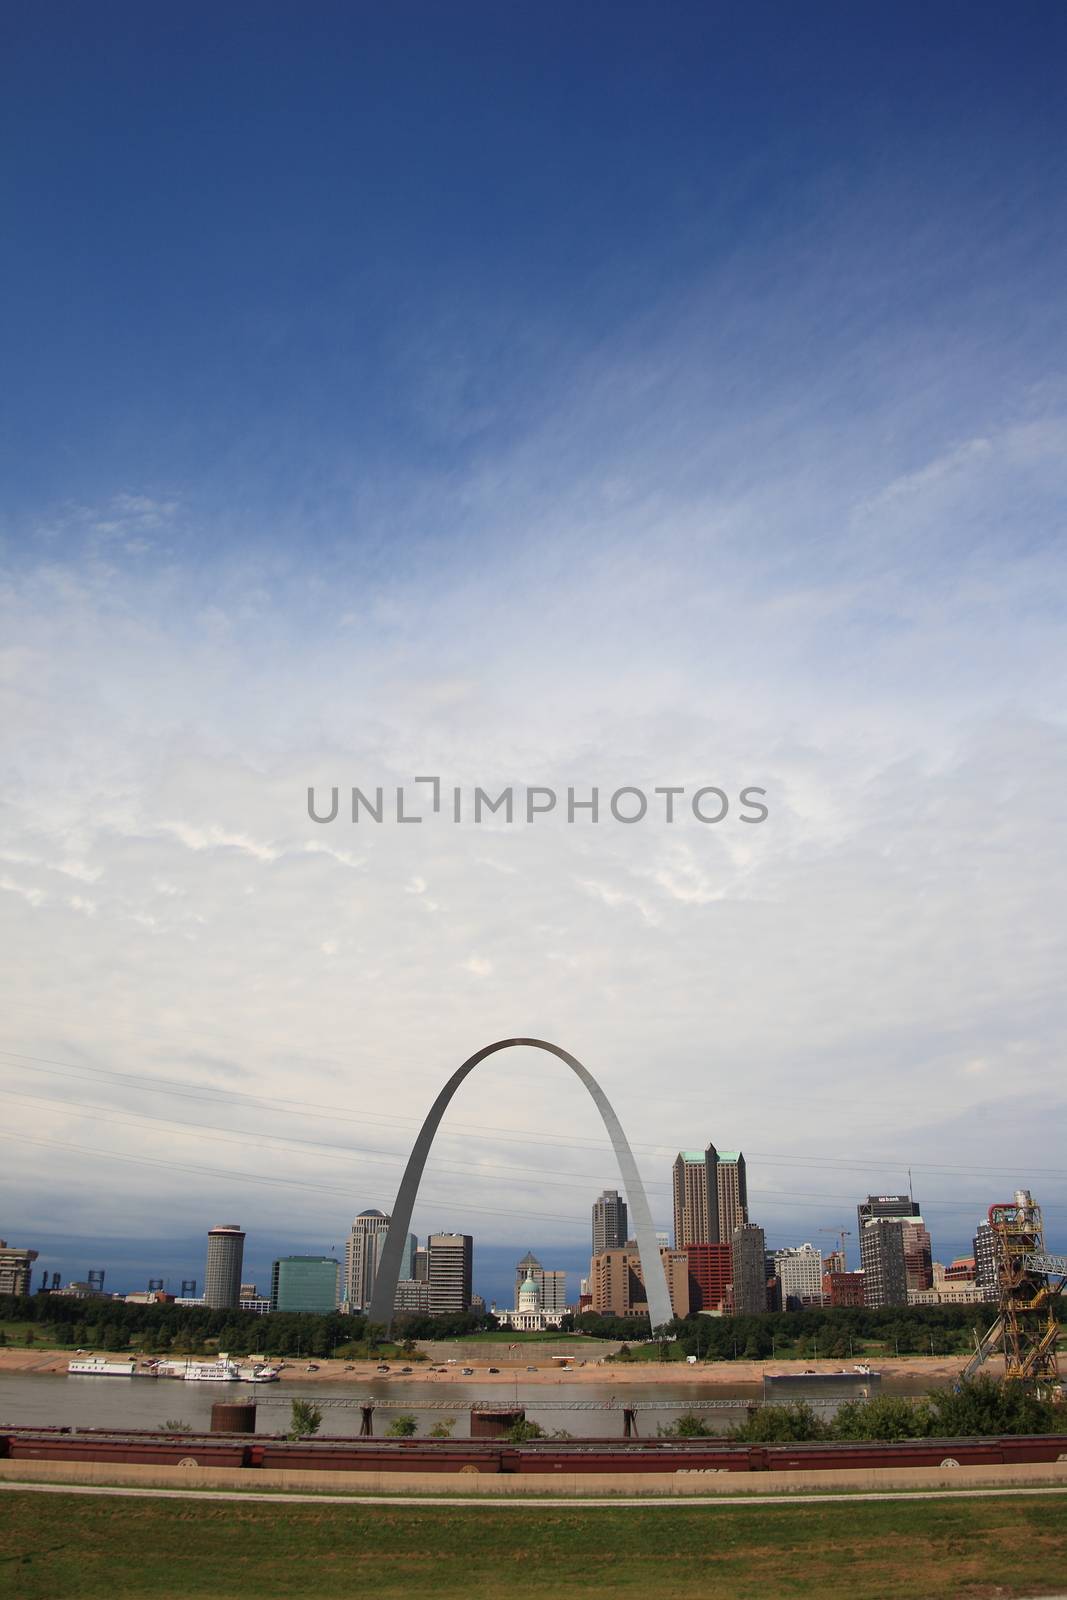 View of St. Louis and the historic Gateway Arch in Missouri, from across the Mississippi River in Illinois.